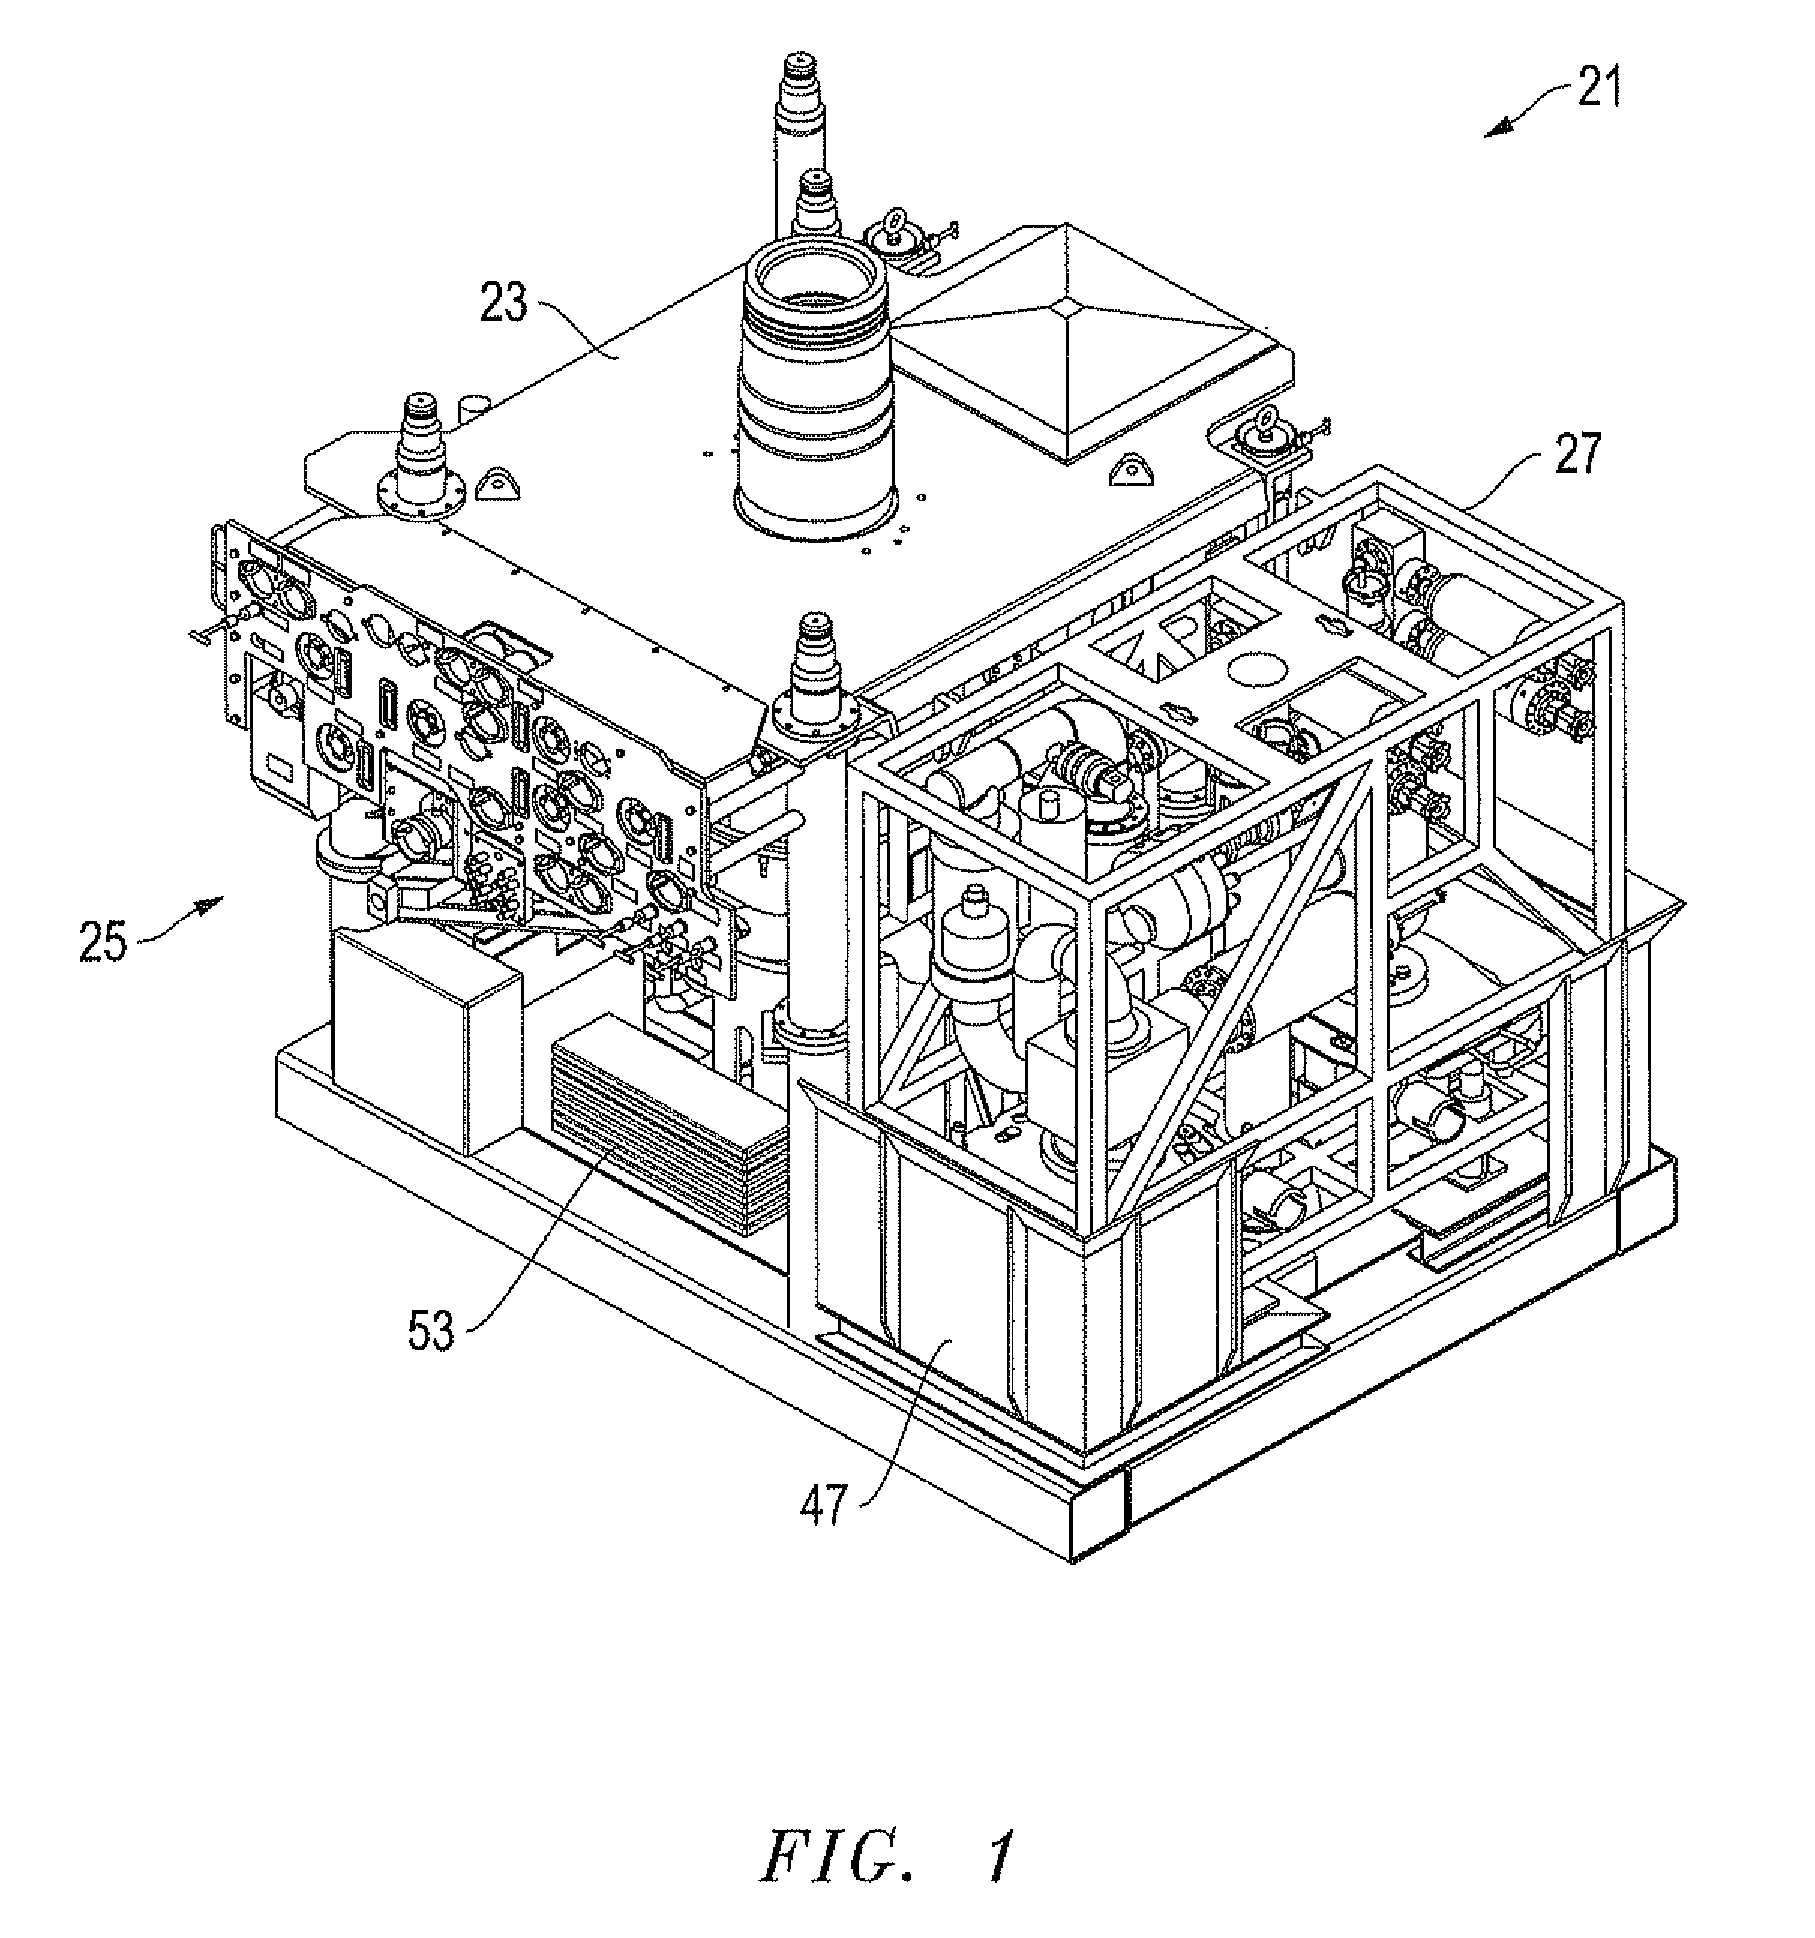 System, method and apparatus for a modular production tree assembly to reduce weight during transfer of tree to rig